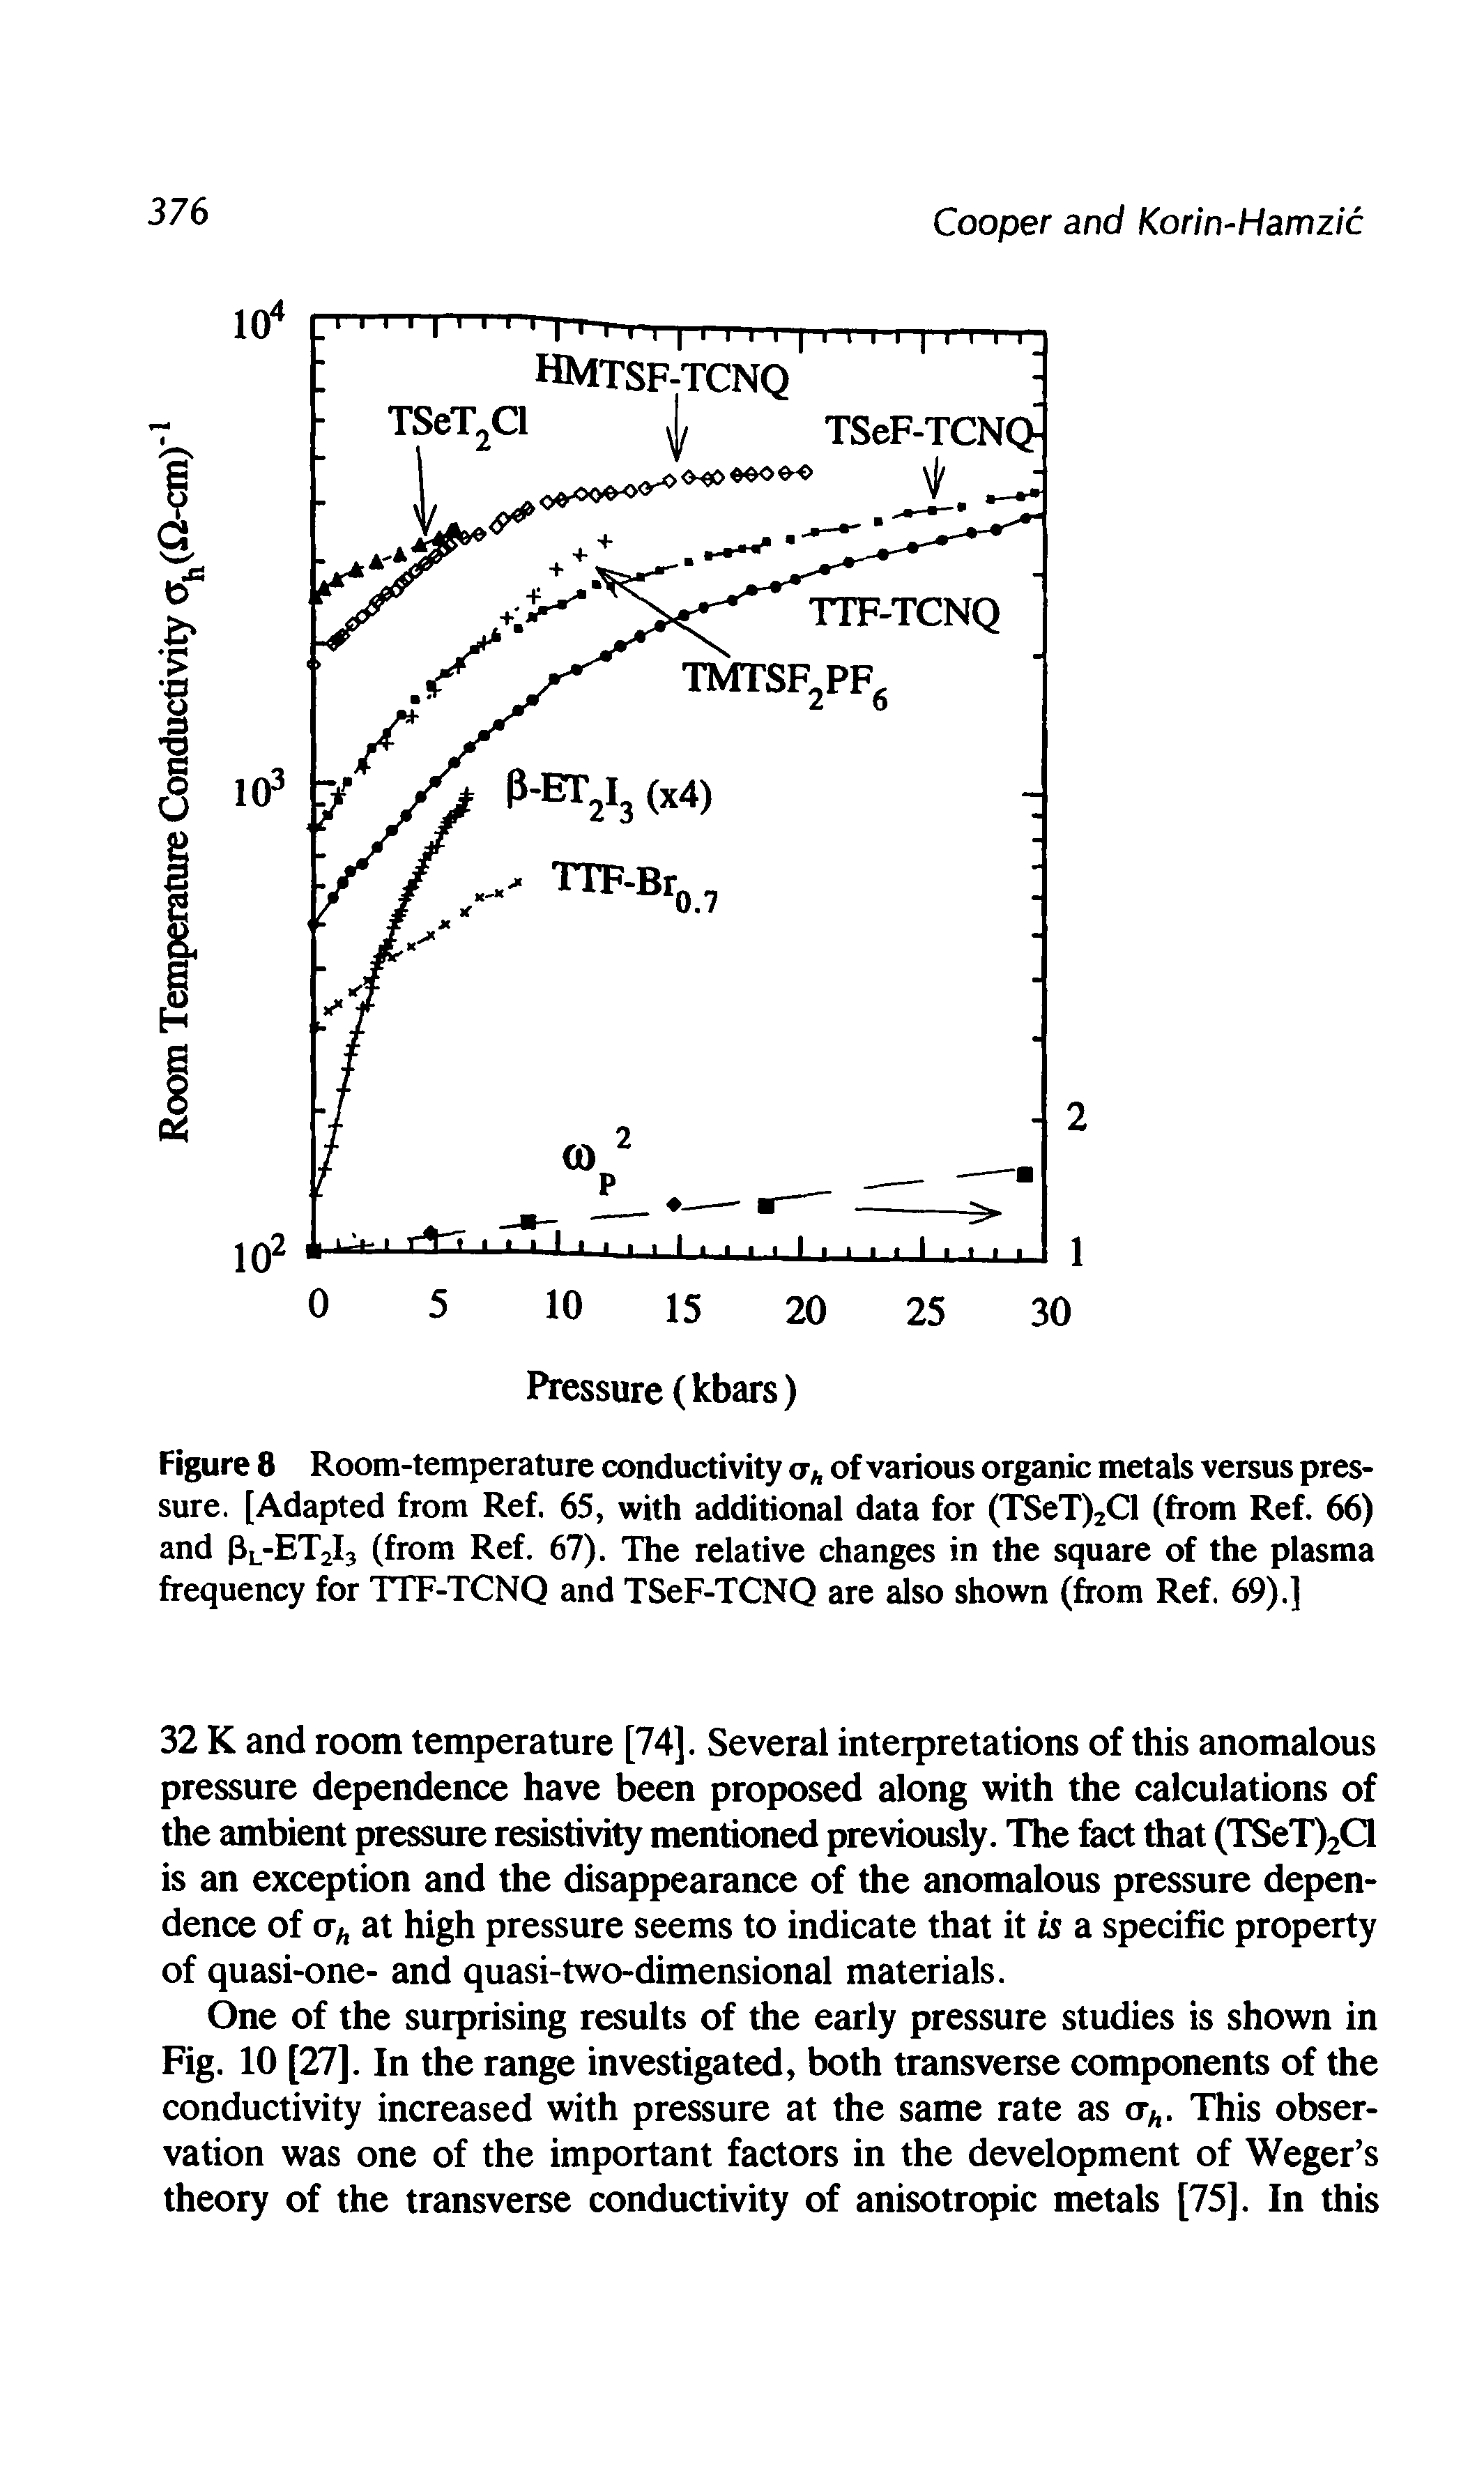 Figure 8 Room-temperature conductivity <jh of various organic metals versus pressure. [Adapted from Ref. 65, with additional data for (TSeT)2Cl (from Ref. 66) and pL-ET2I3 (from Ref. 67). The relative changes in the square of the plasma frequency for TTF-TCNQ and TSeF-TCNQ are also shown (from Ref. 69).]...